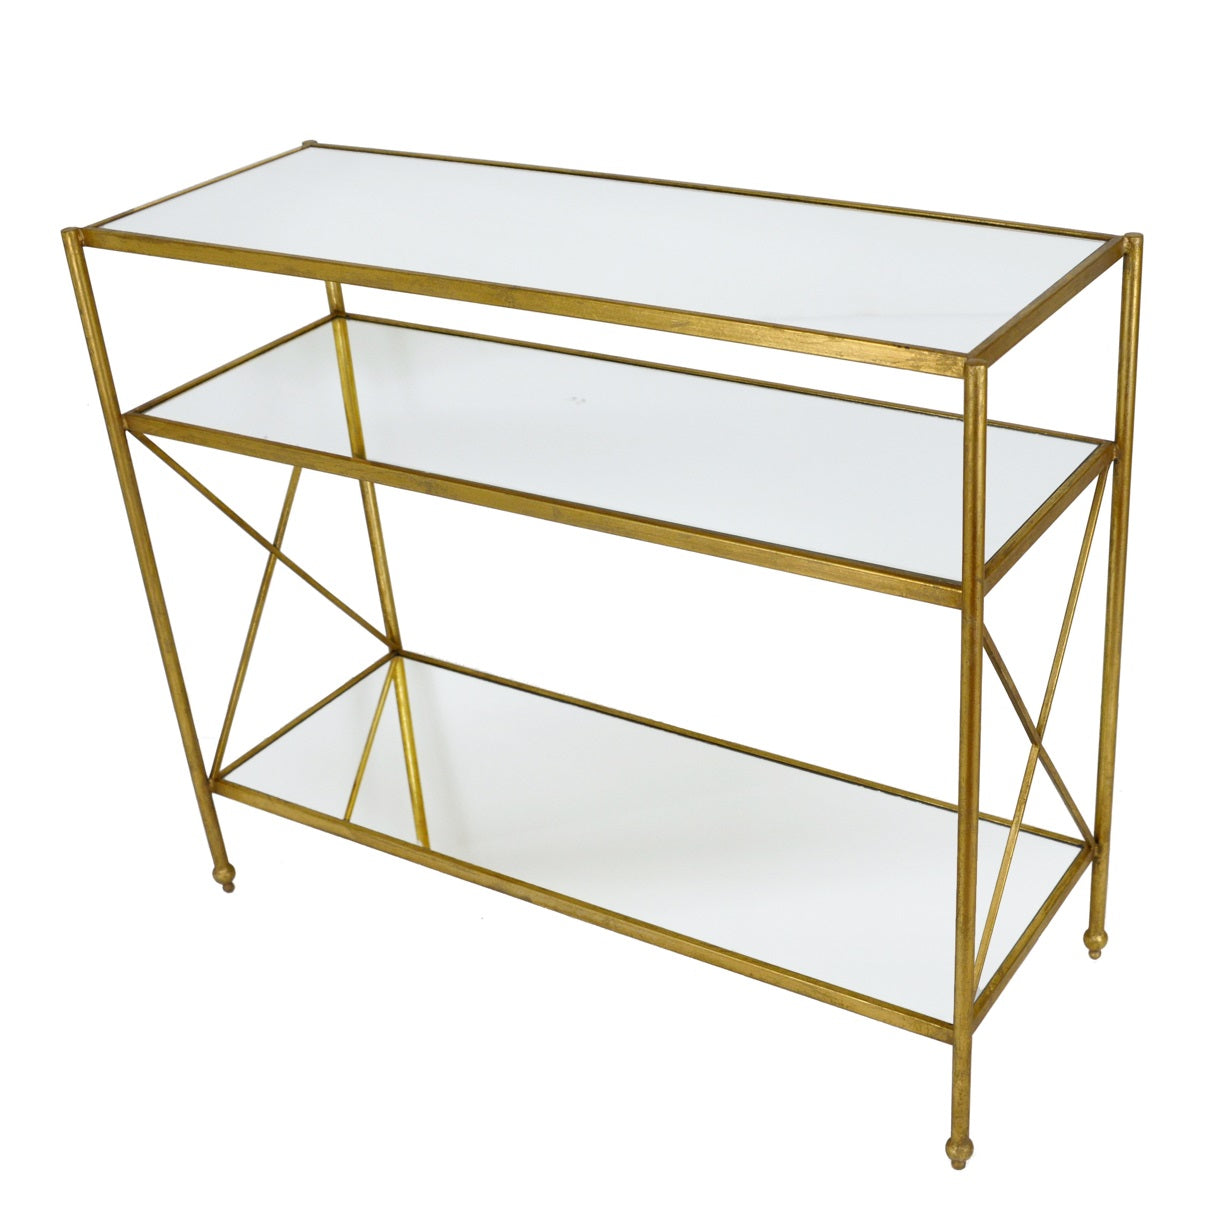 Alan Gold Console Table With 3 Shelves